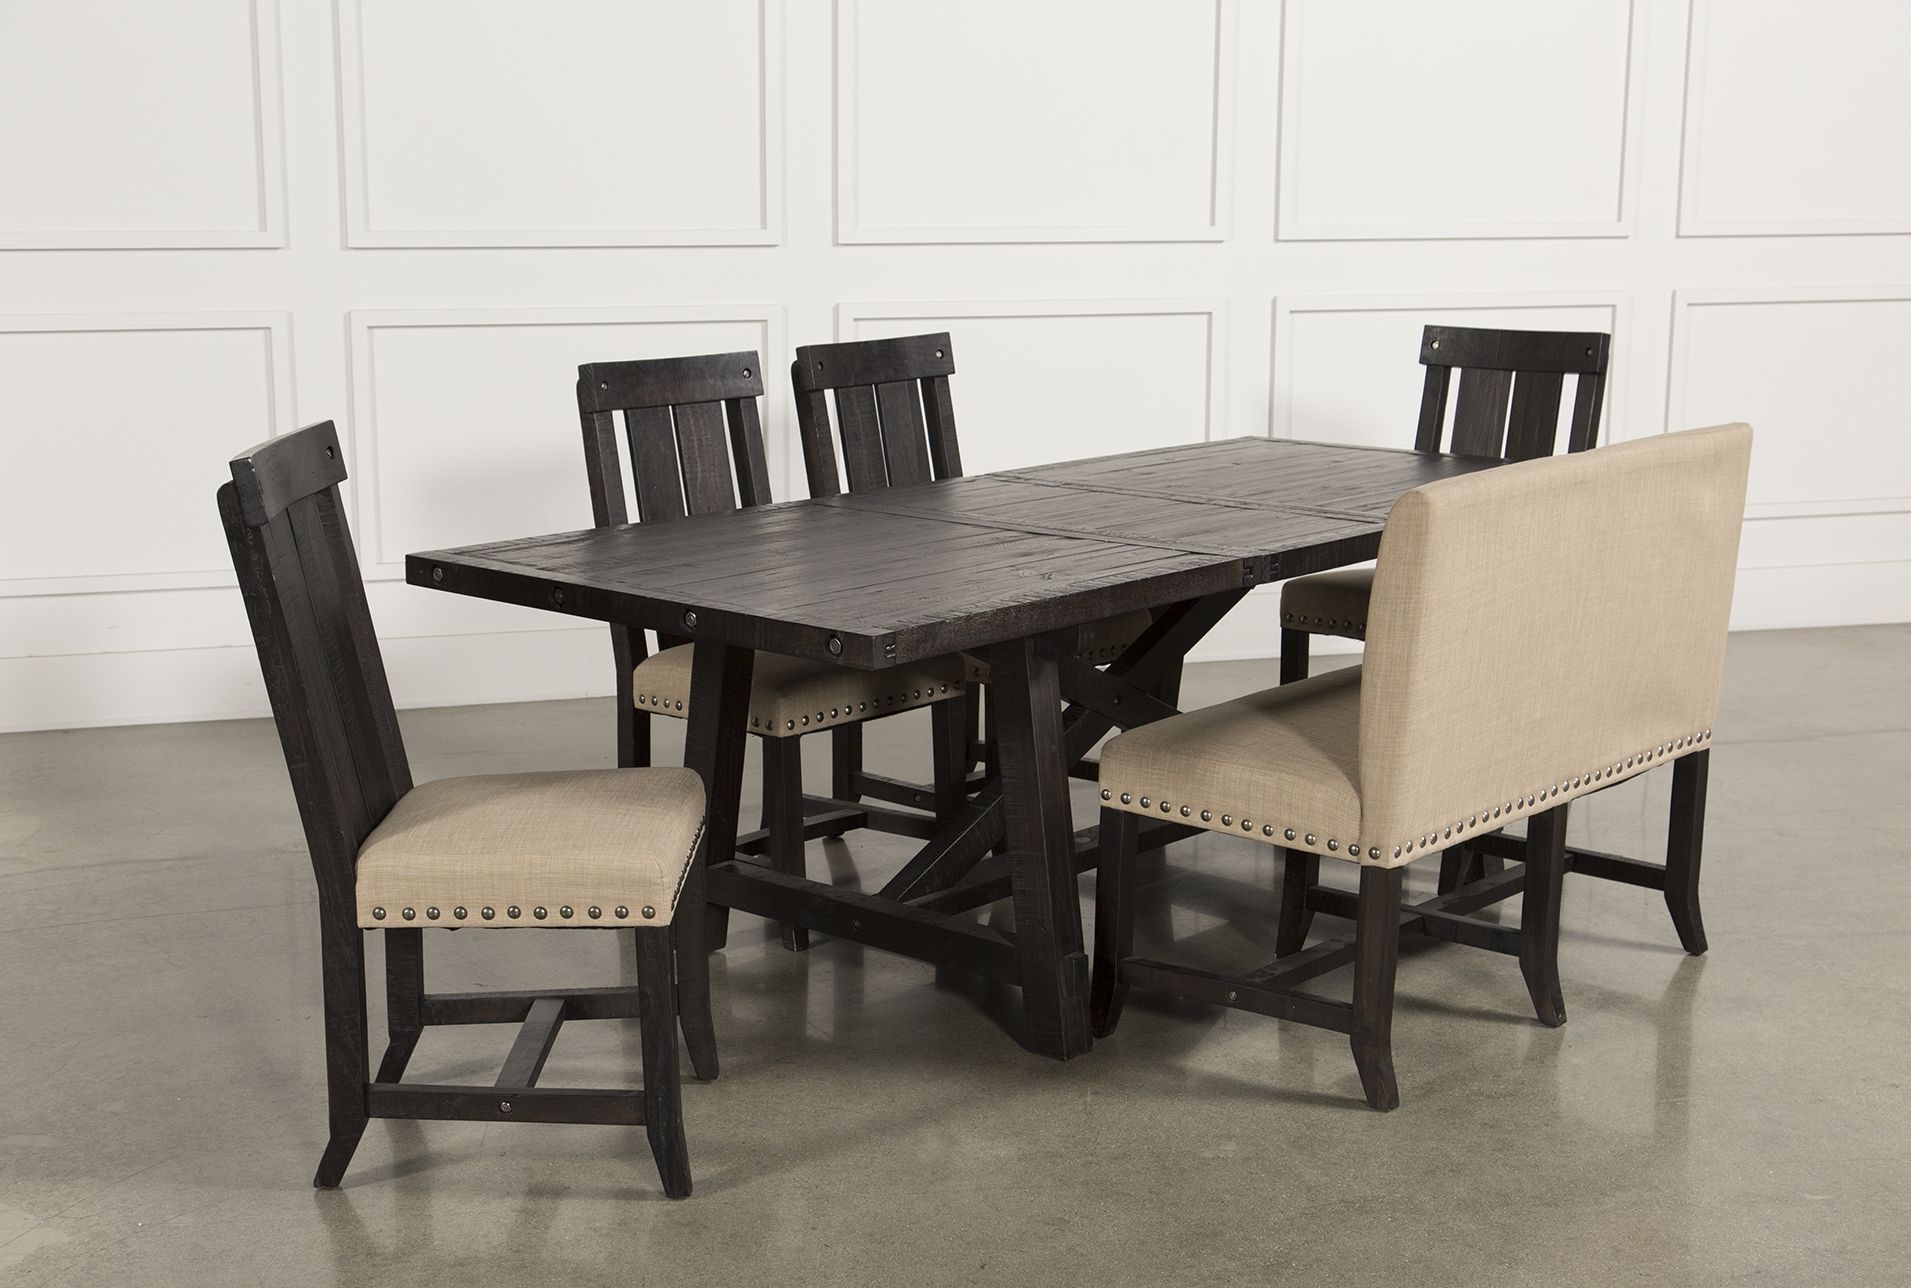 Jaxon 6 Piece Rectangle Dining Set W/bench & Wood Chairs | Products Throughout Most Up To Date Jaxon Grey 7 Piece Rectangle Extension Dining Sets With Uph Chairs (View 4 of 20)